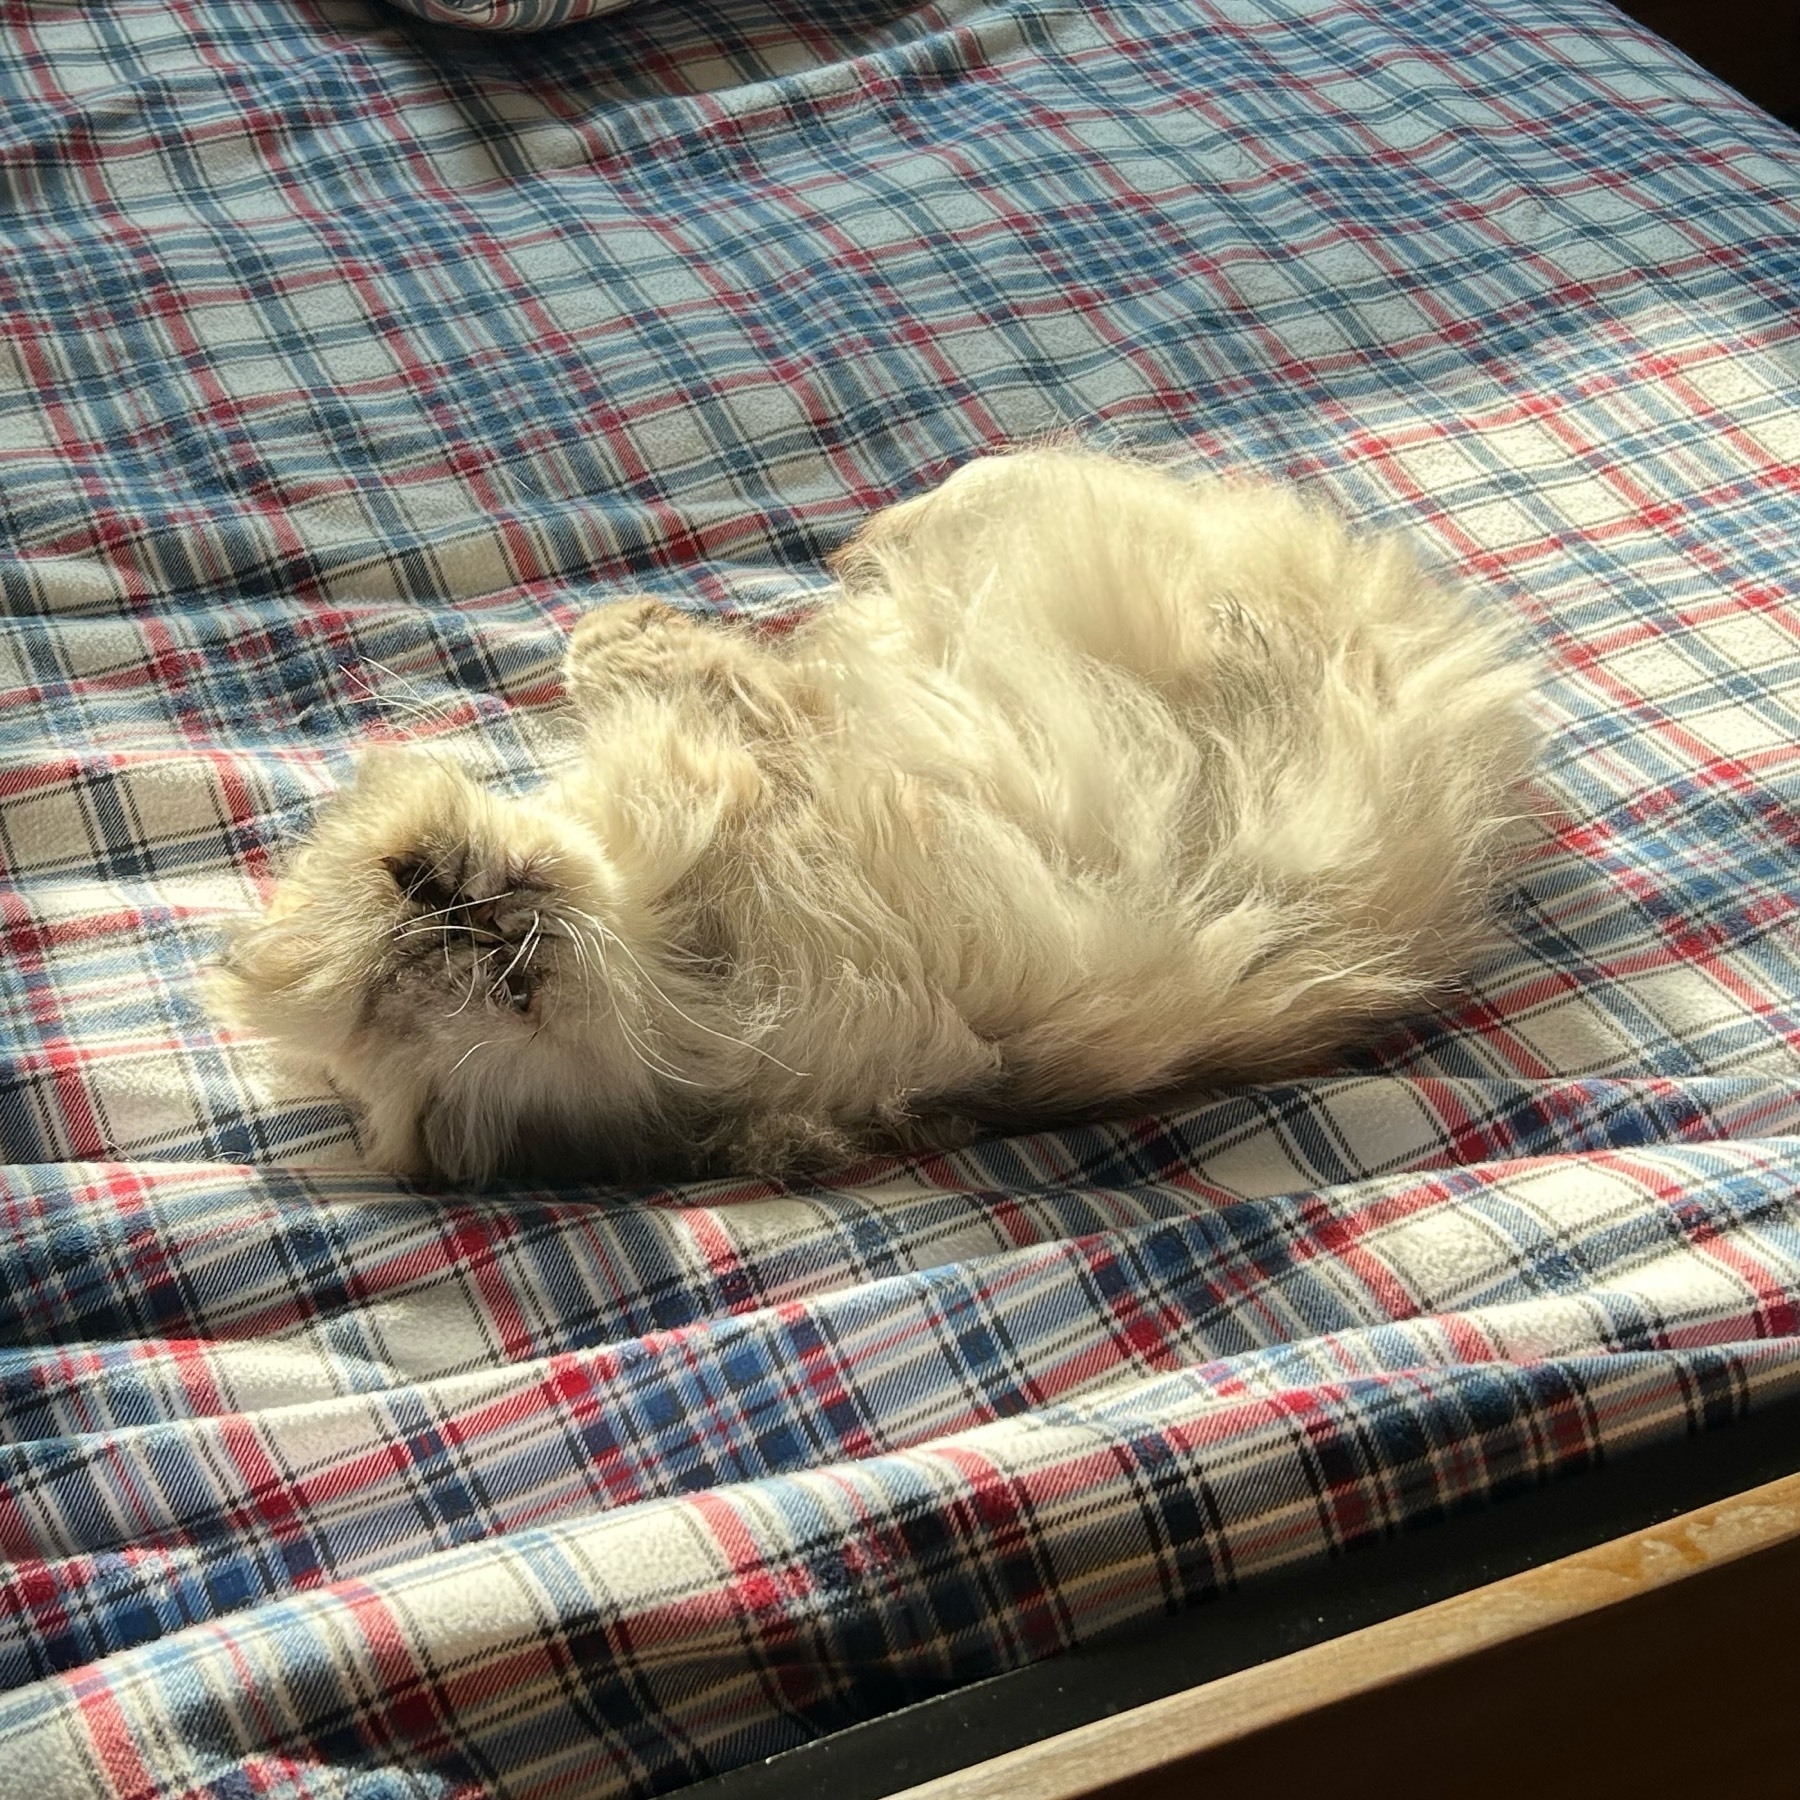 A white cat on its back on a bed looking toward the camera.